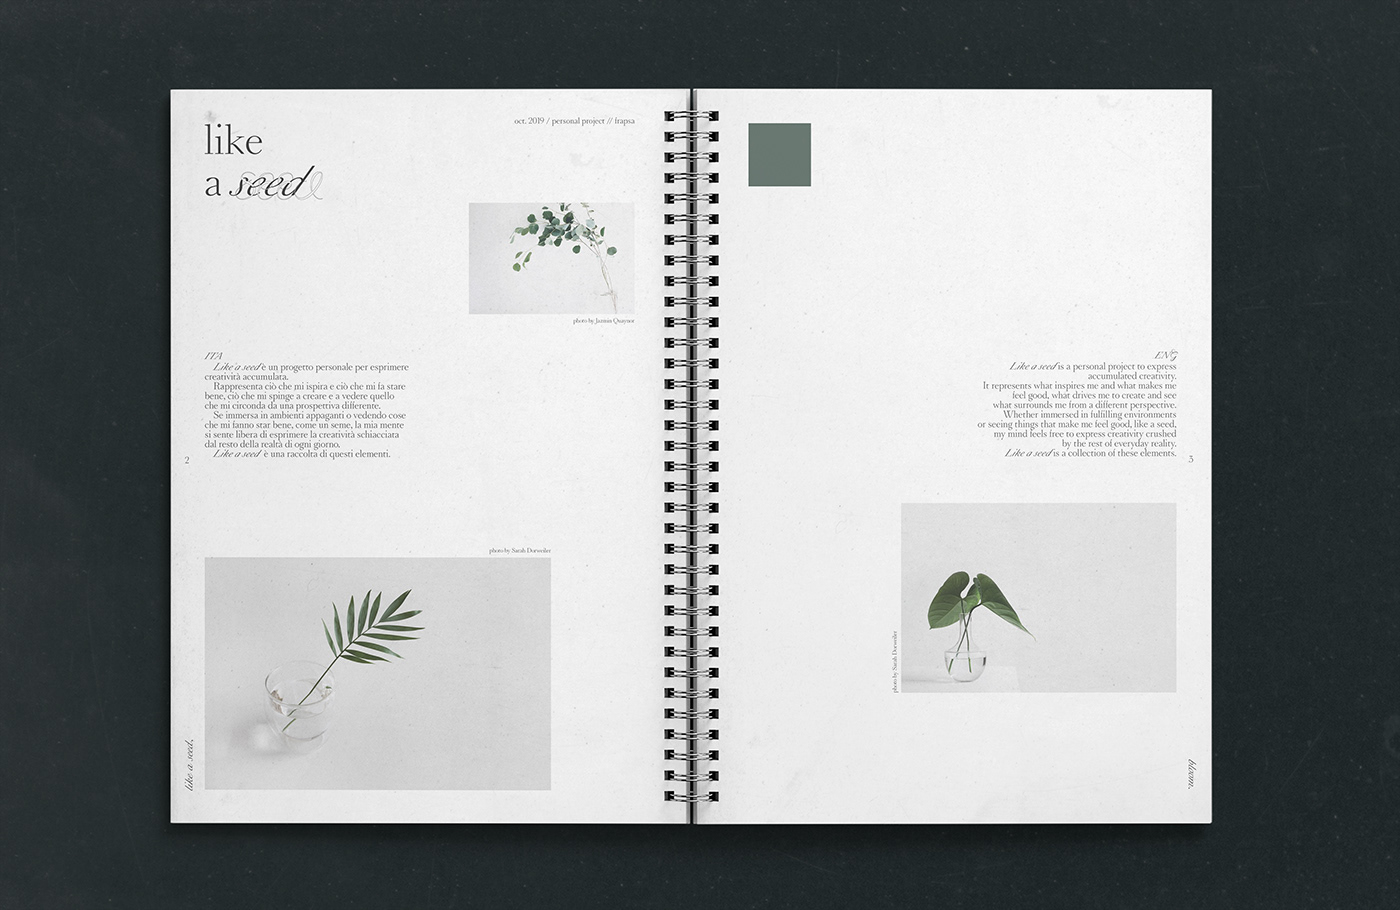 graphic design  editorial art direction  typography   inspiration personal project fanzine magazine Project type